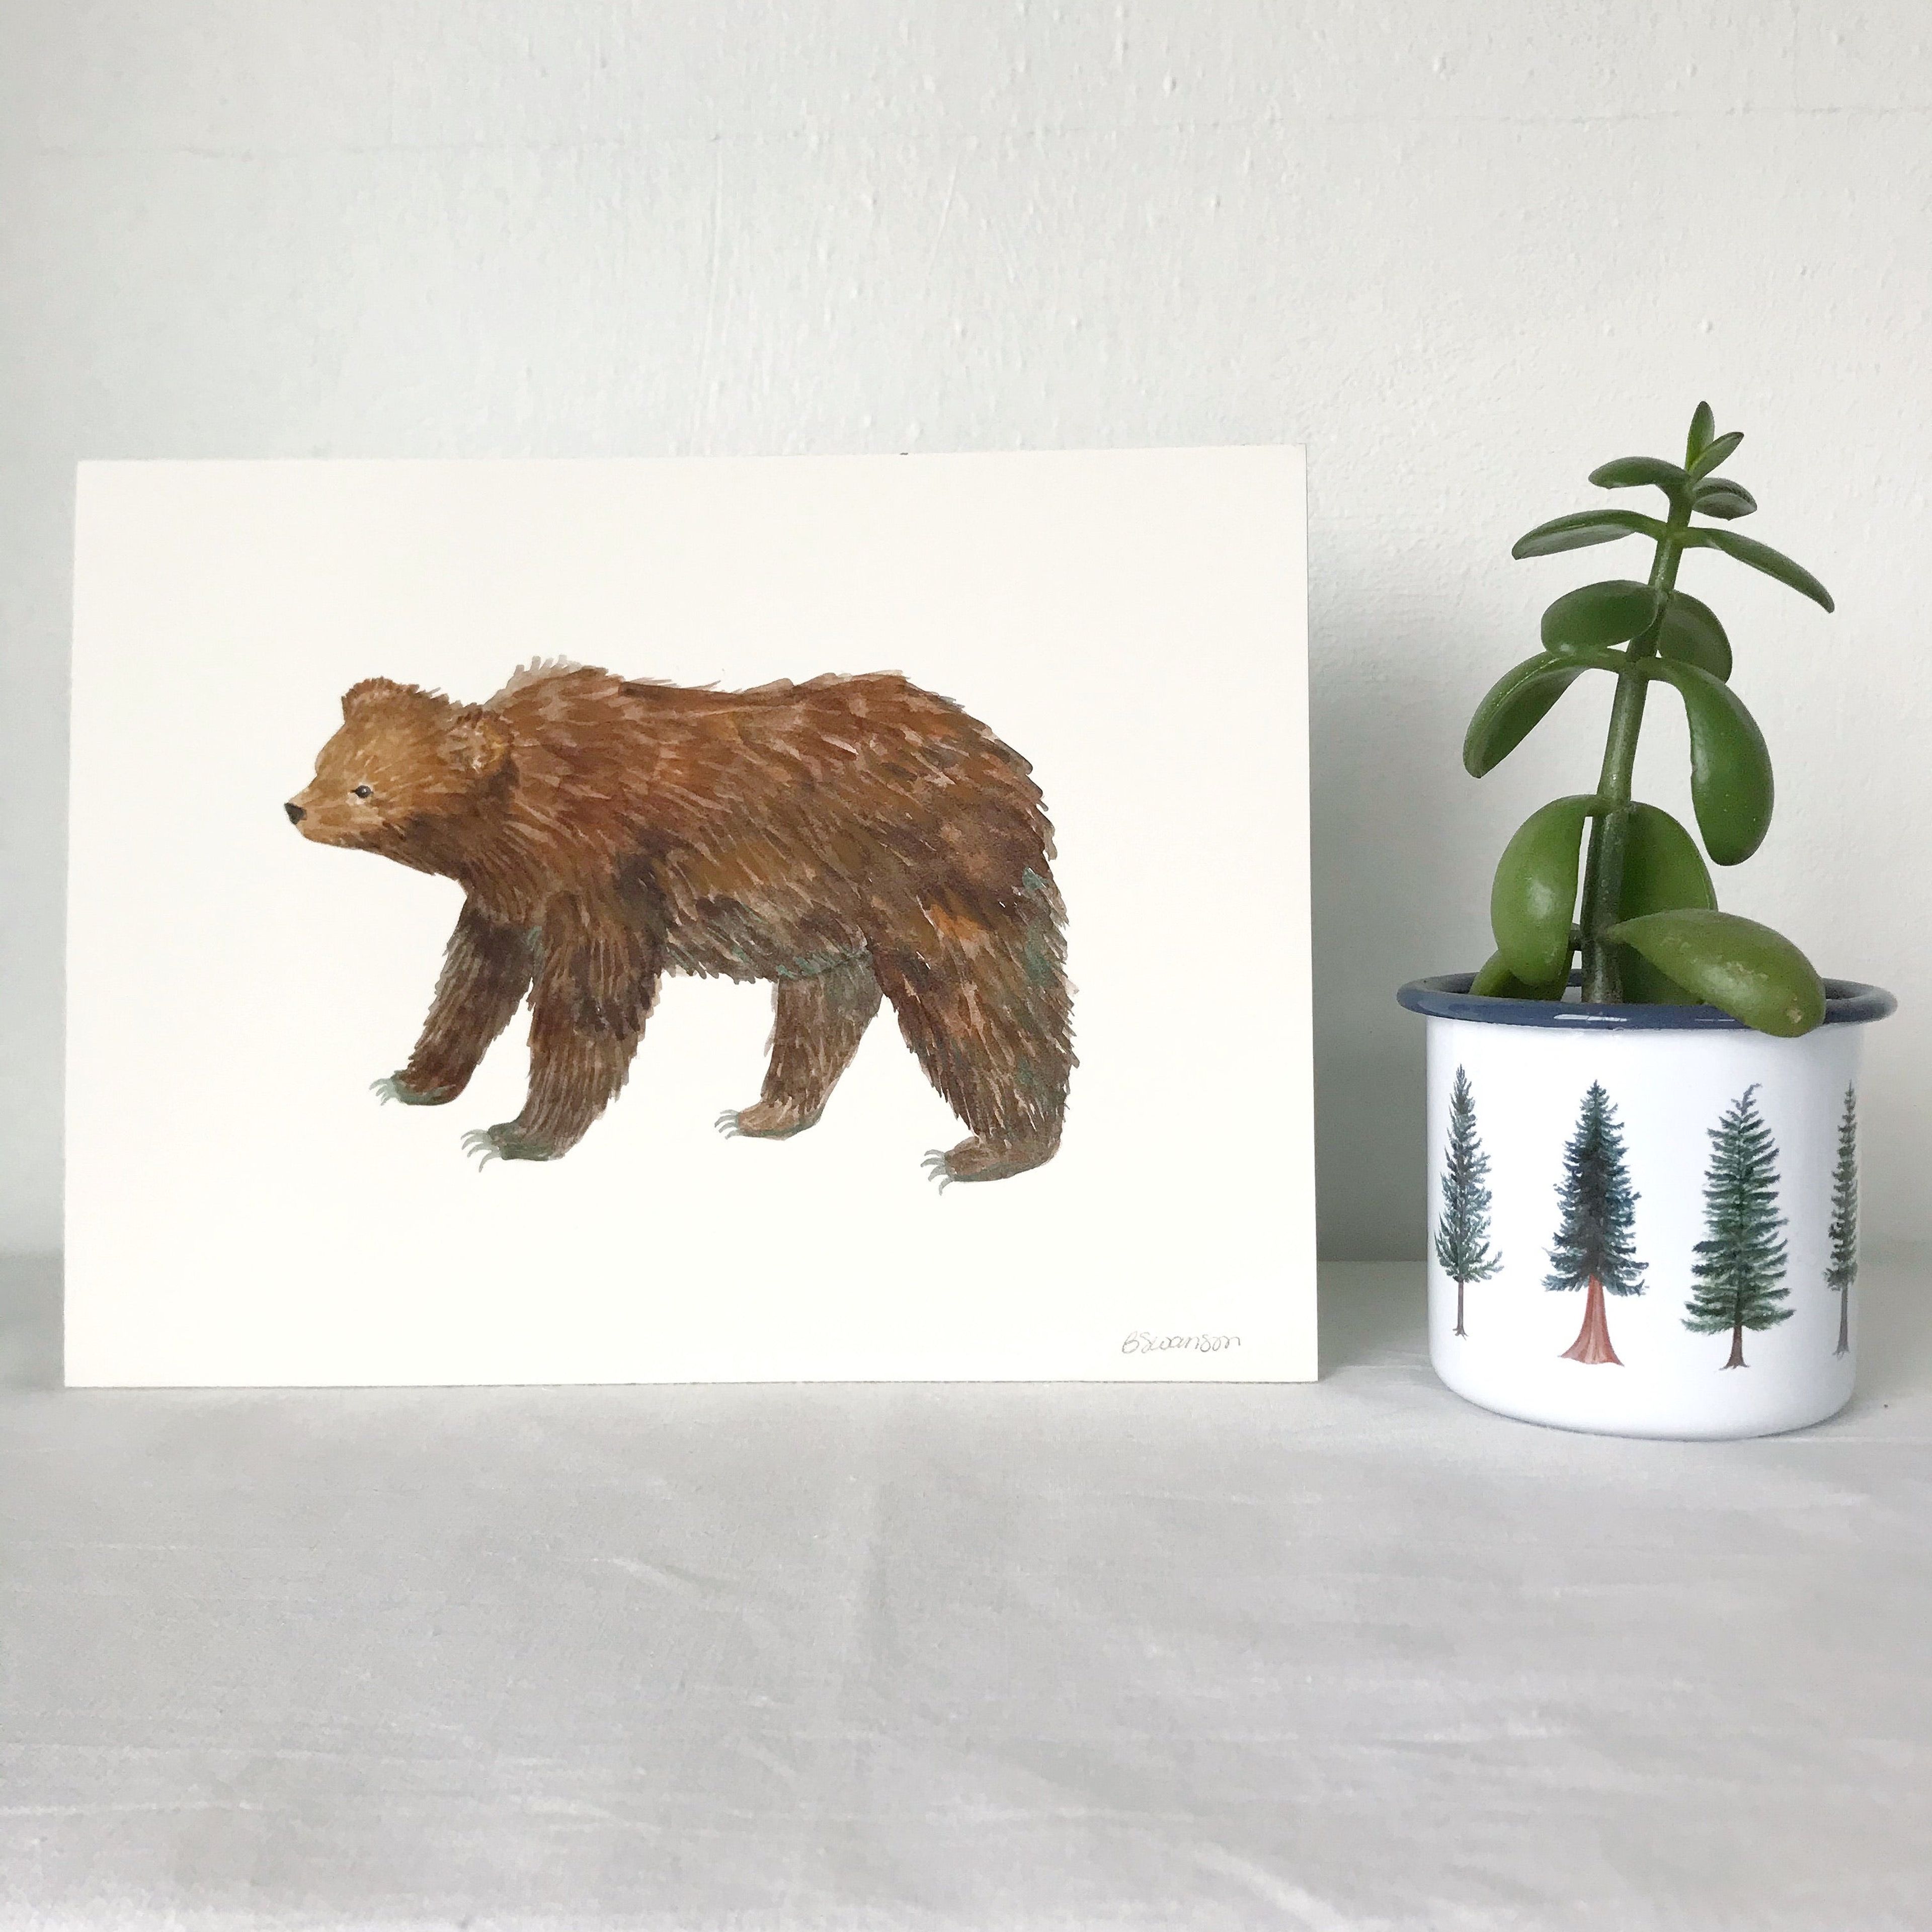 Grizzly Bear Original Watercolor Painting